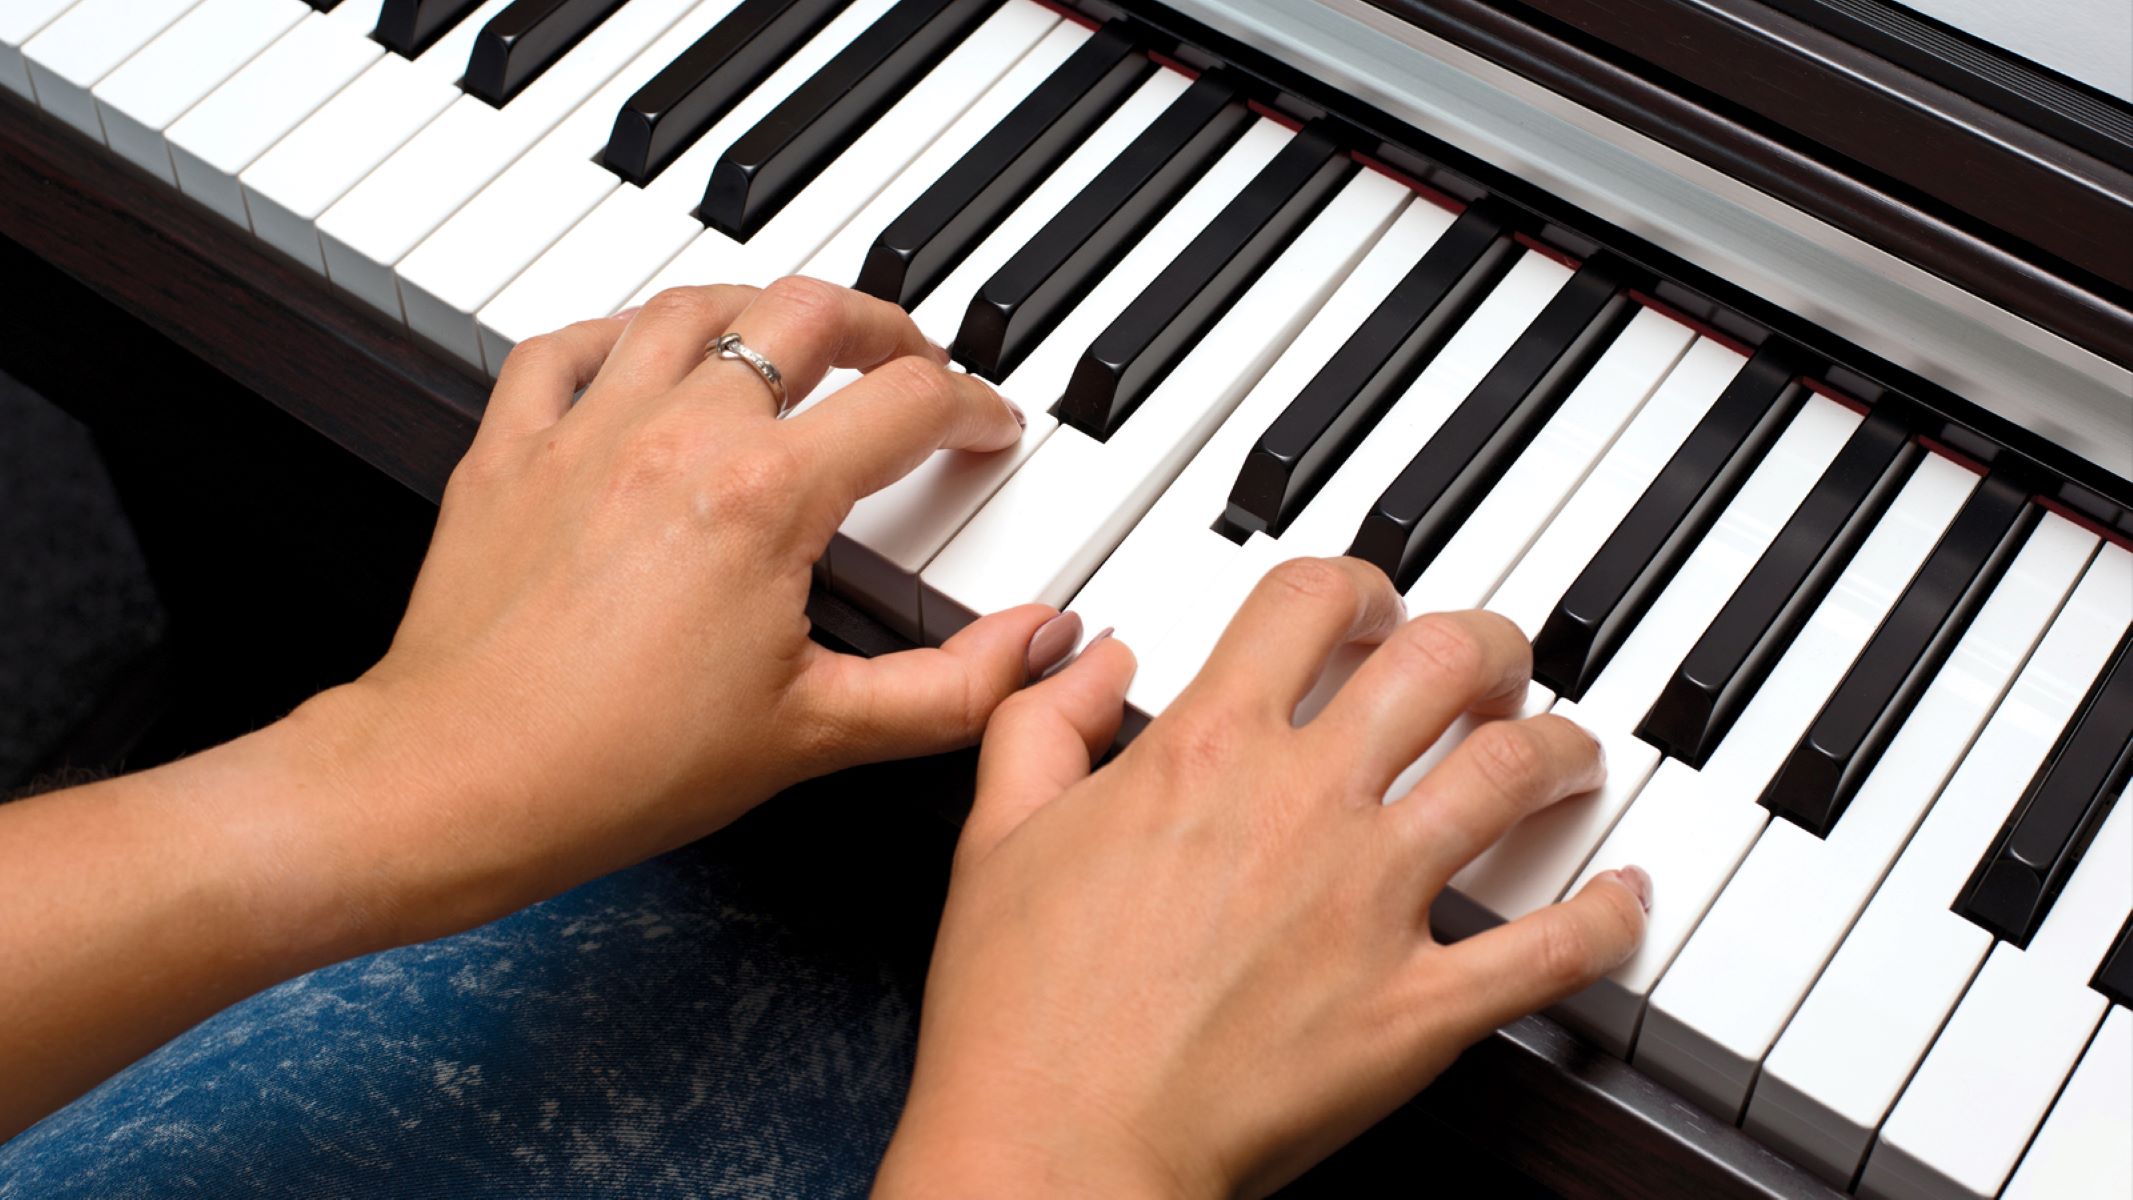 What To Look For When Buying A Used Digital Piano